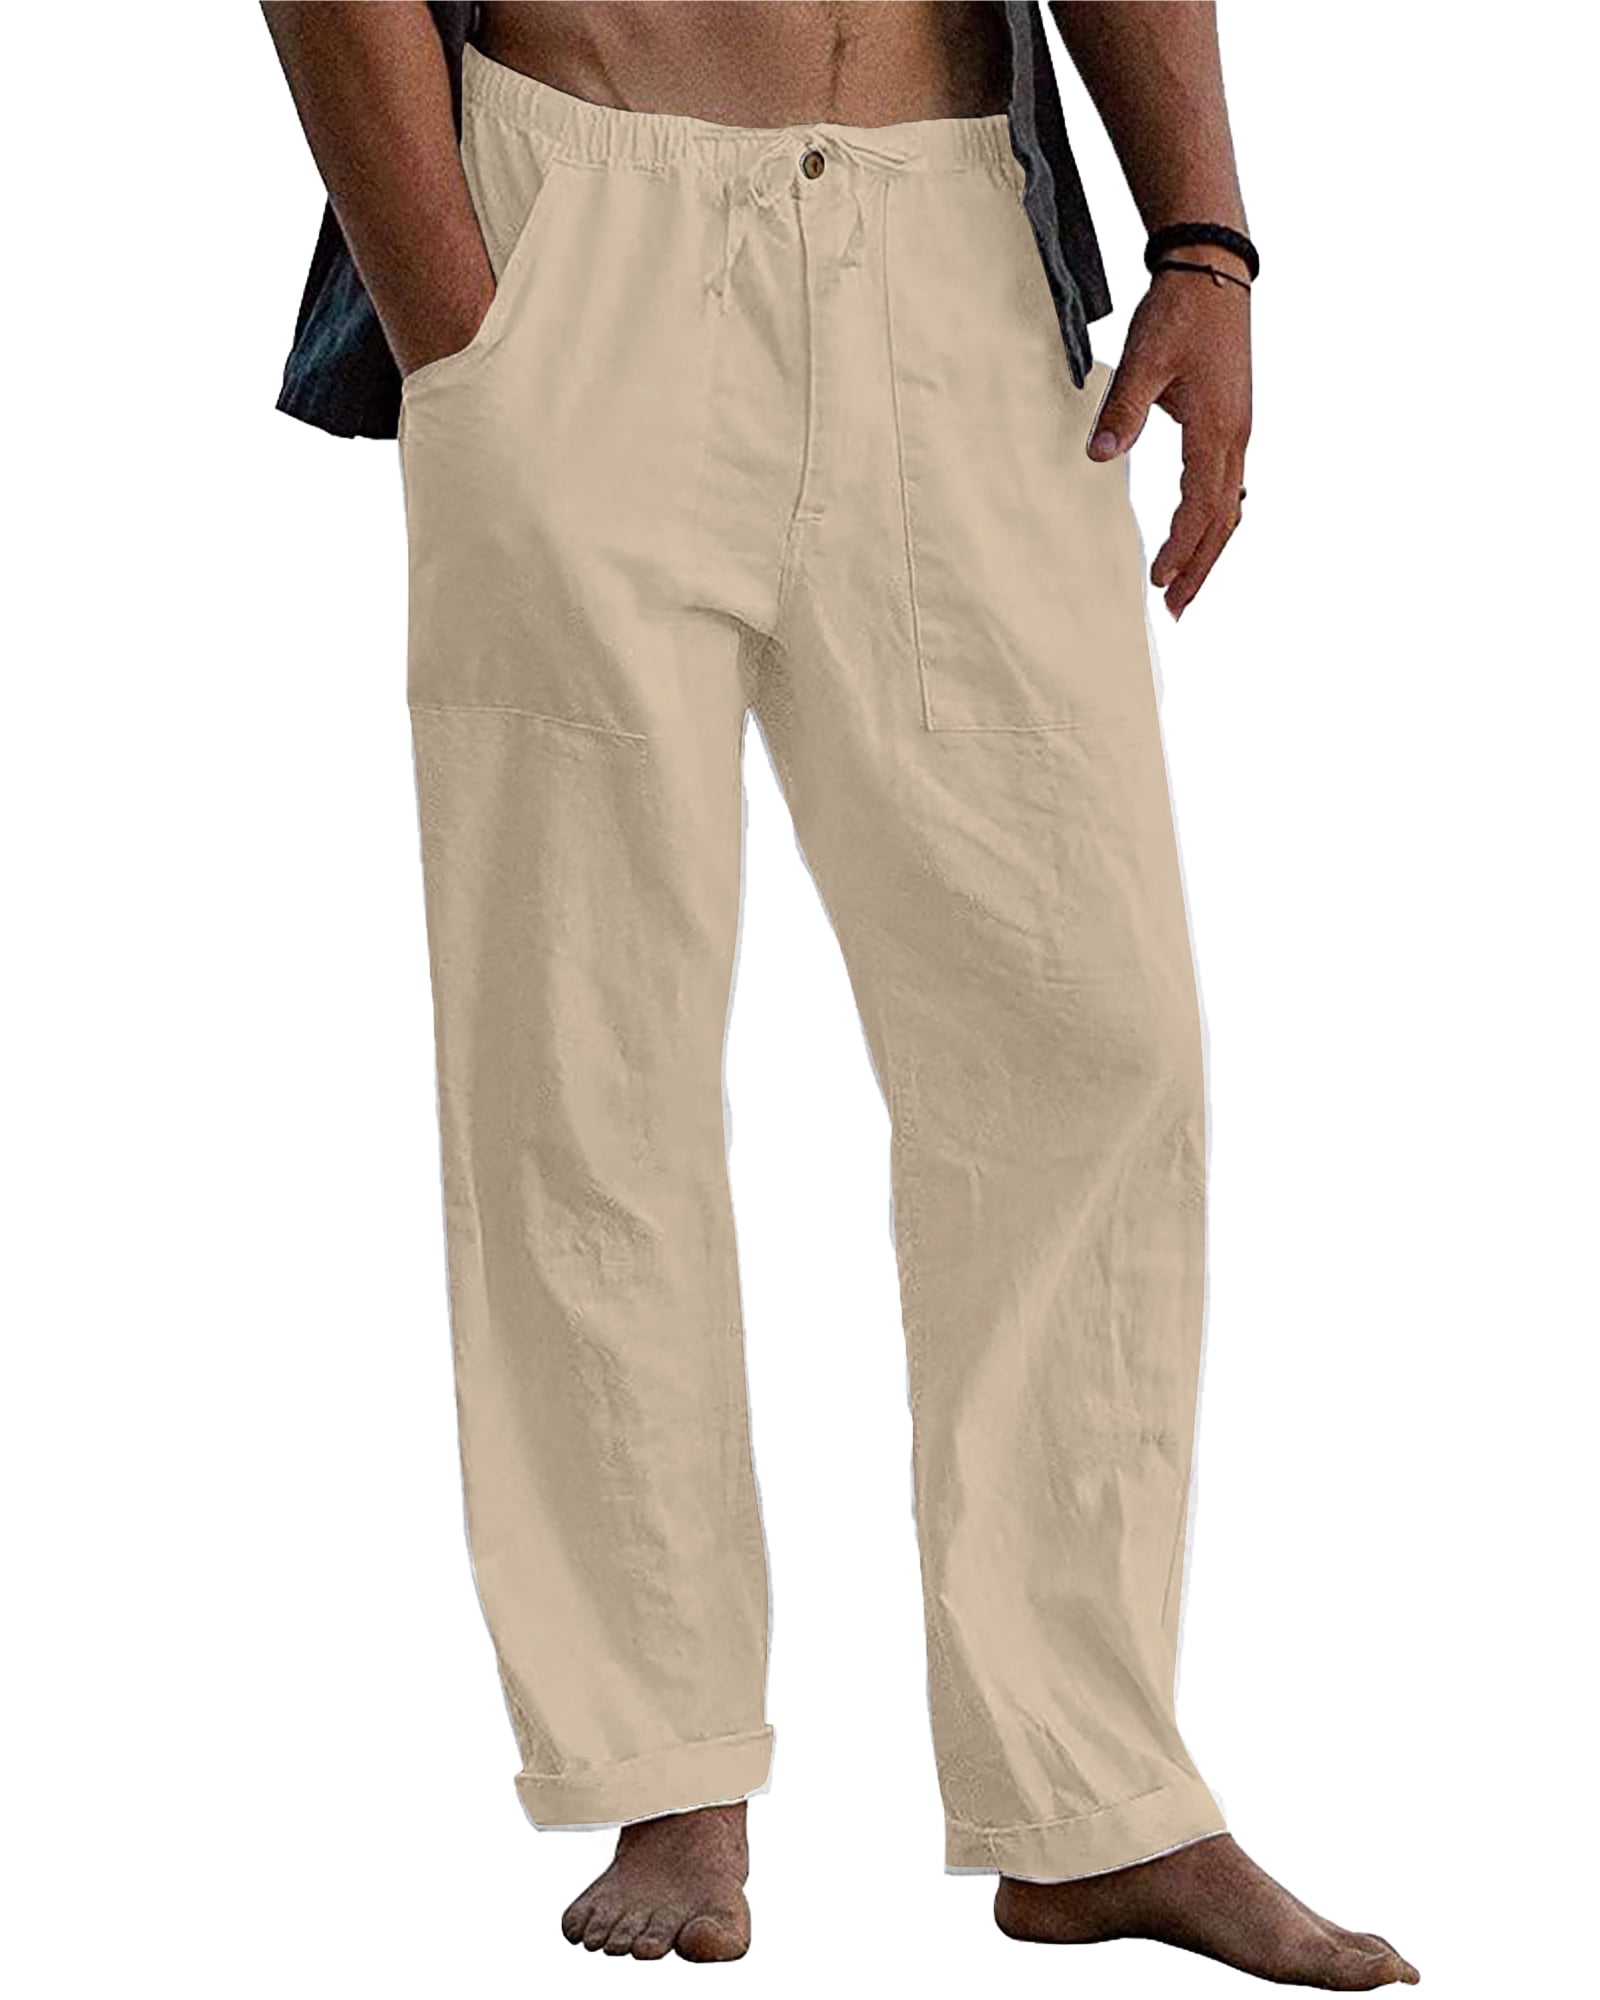 LVCBL Men's Summer Loose Casual Linen Long Trousers with Pockets ...